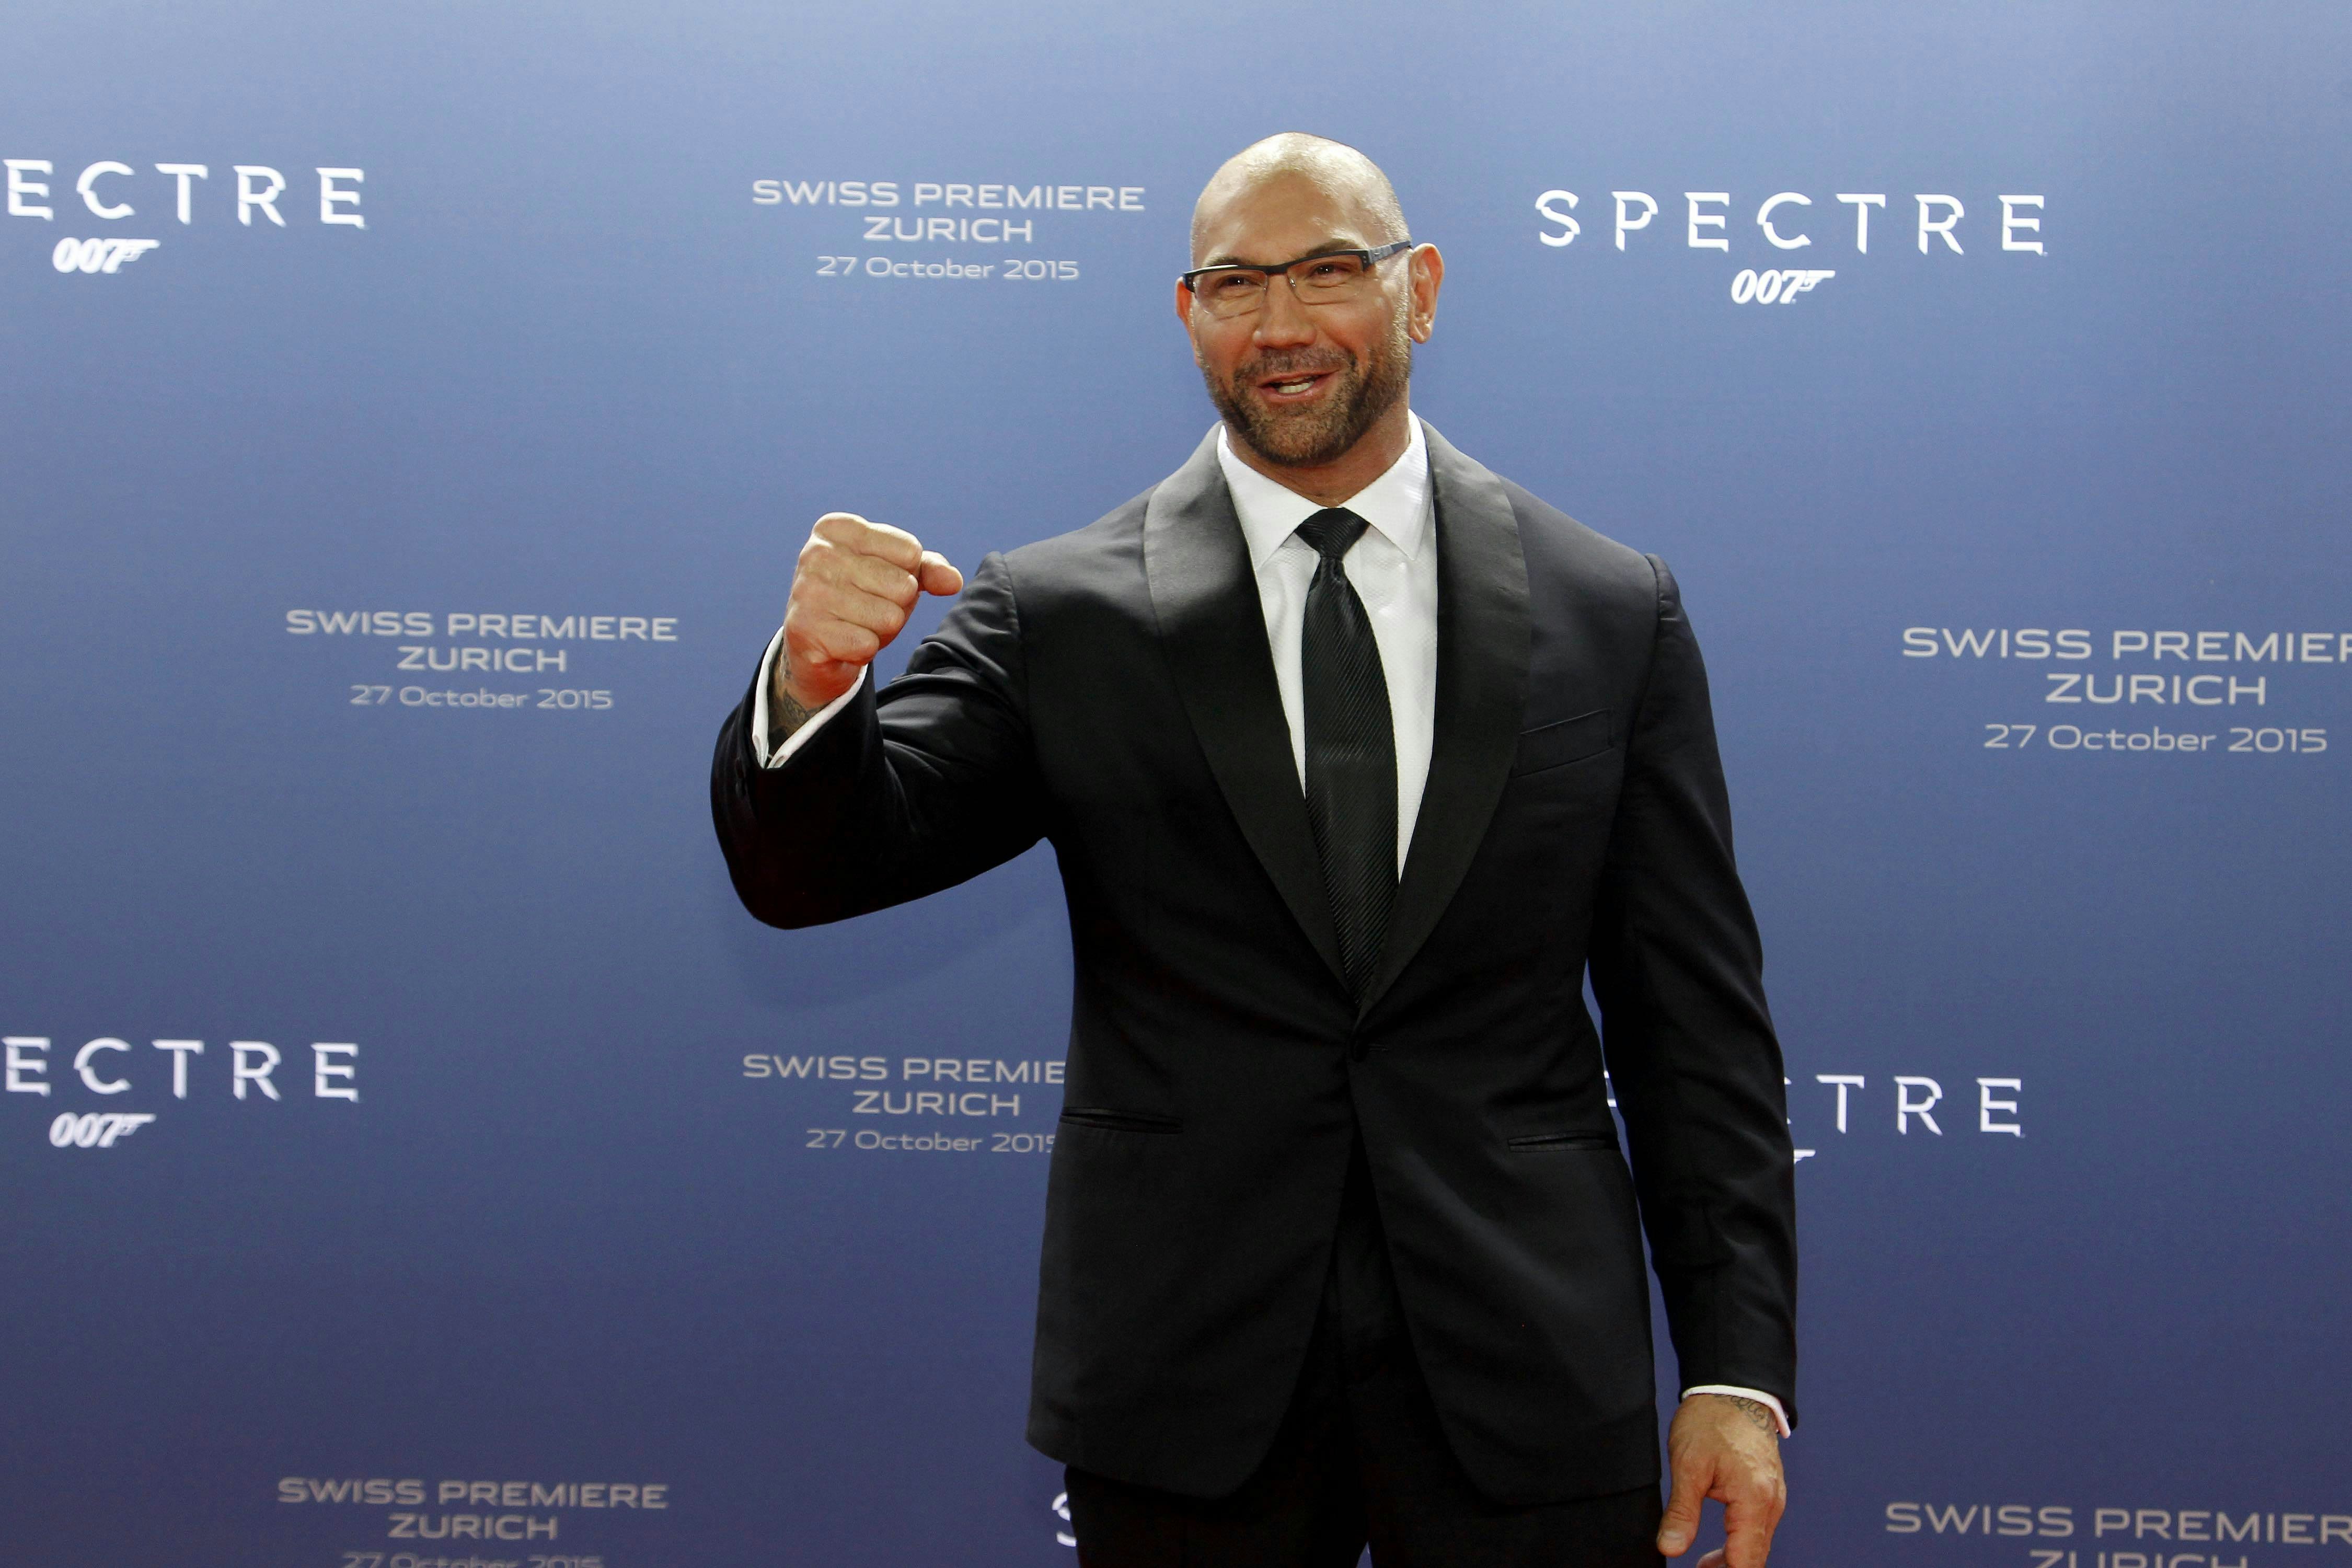 Dave Bautista joins action-comedy 'Dogtown